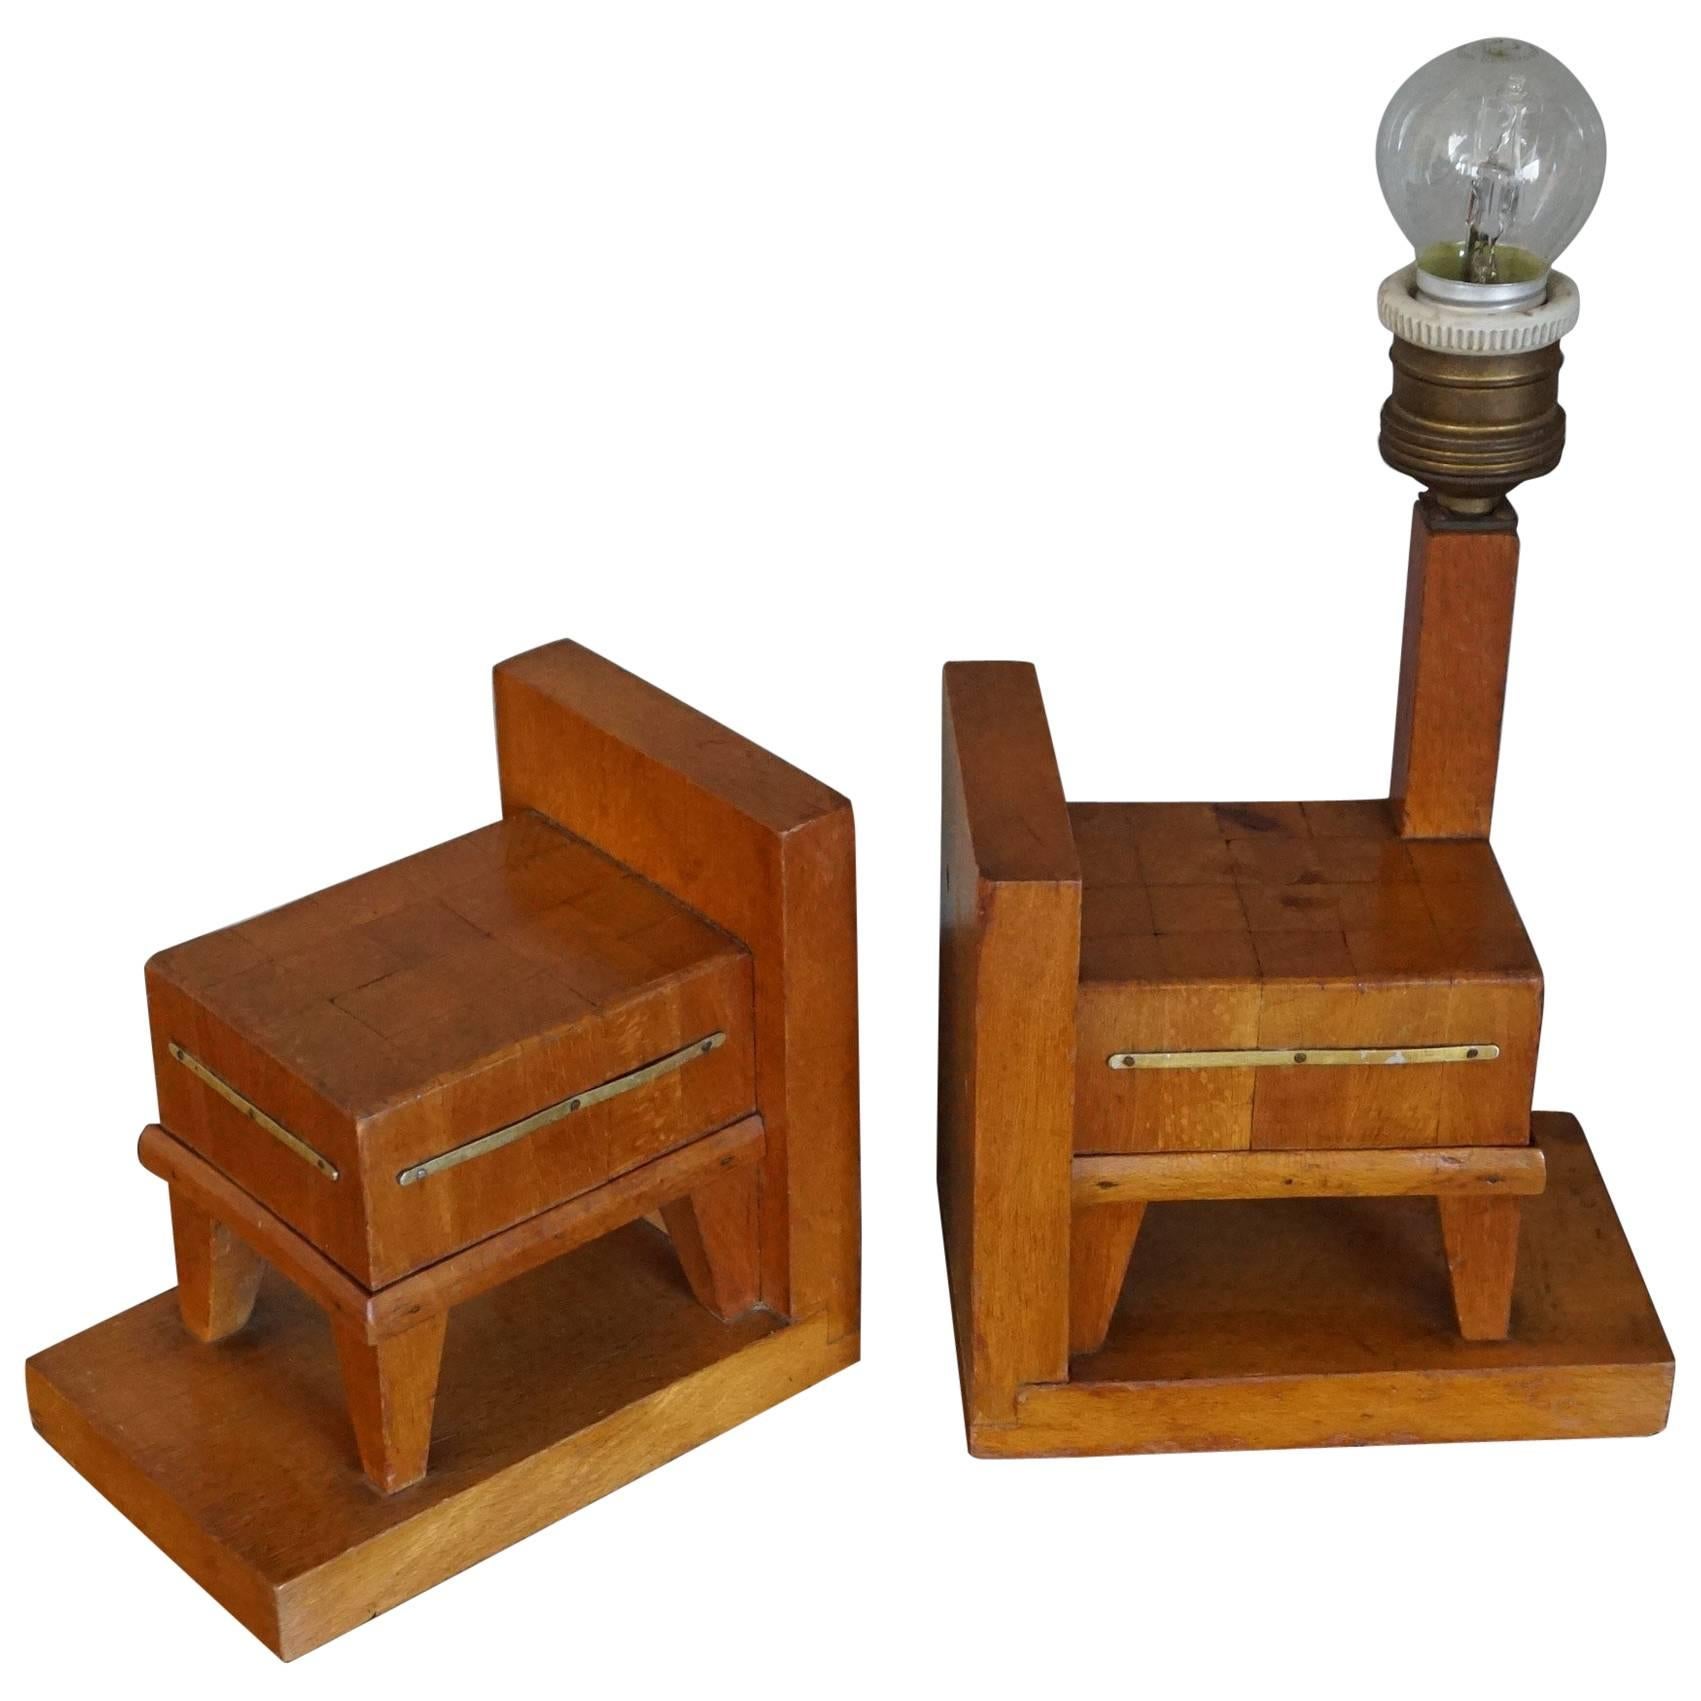 Pair of Wooden Art Deco Butcher Block Bookends with Integrated Table Light